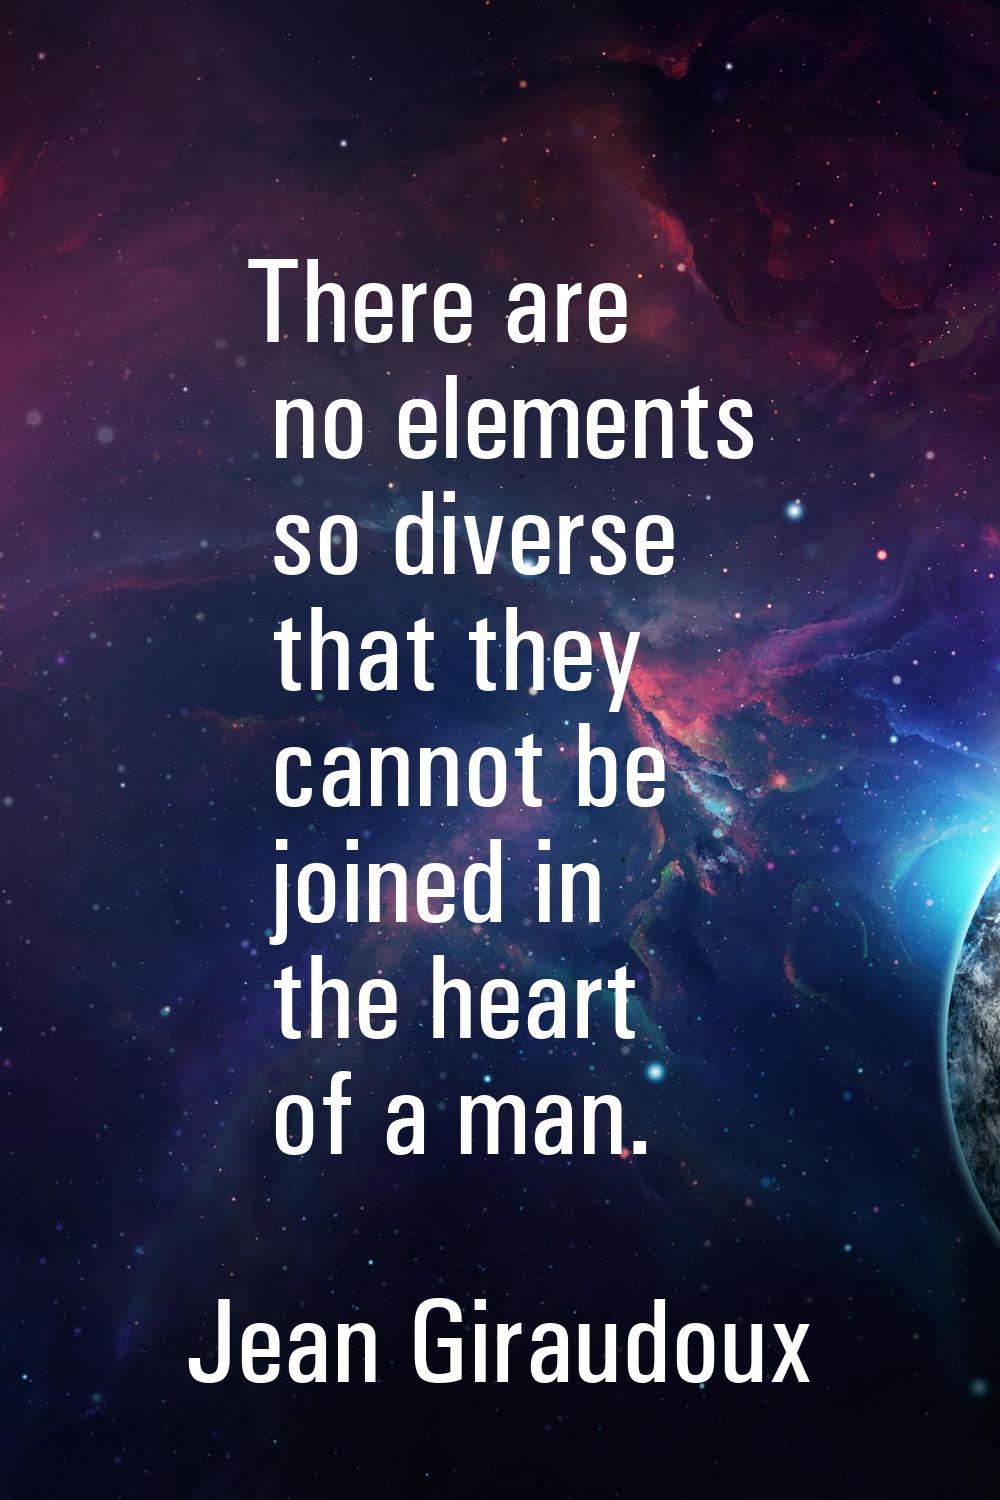 There are no elements so diverse that they cannot be joined in the heart of a man.